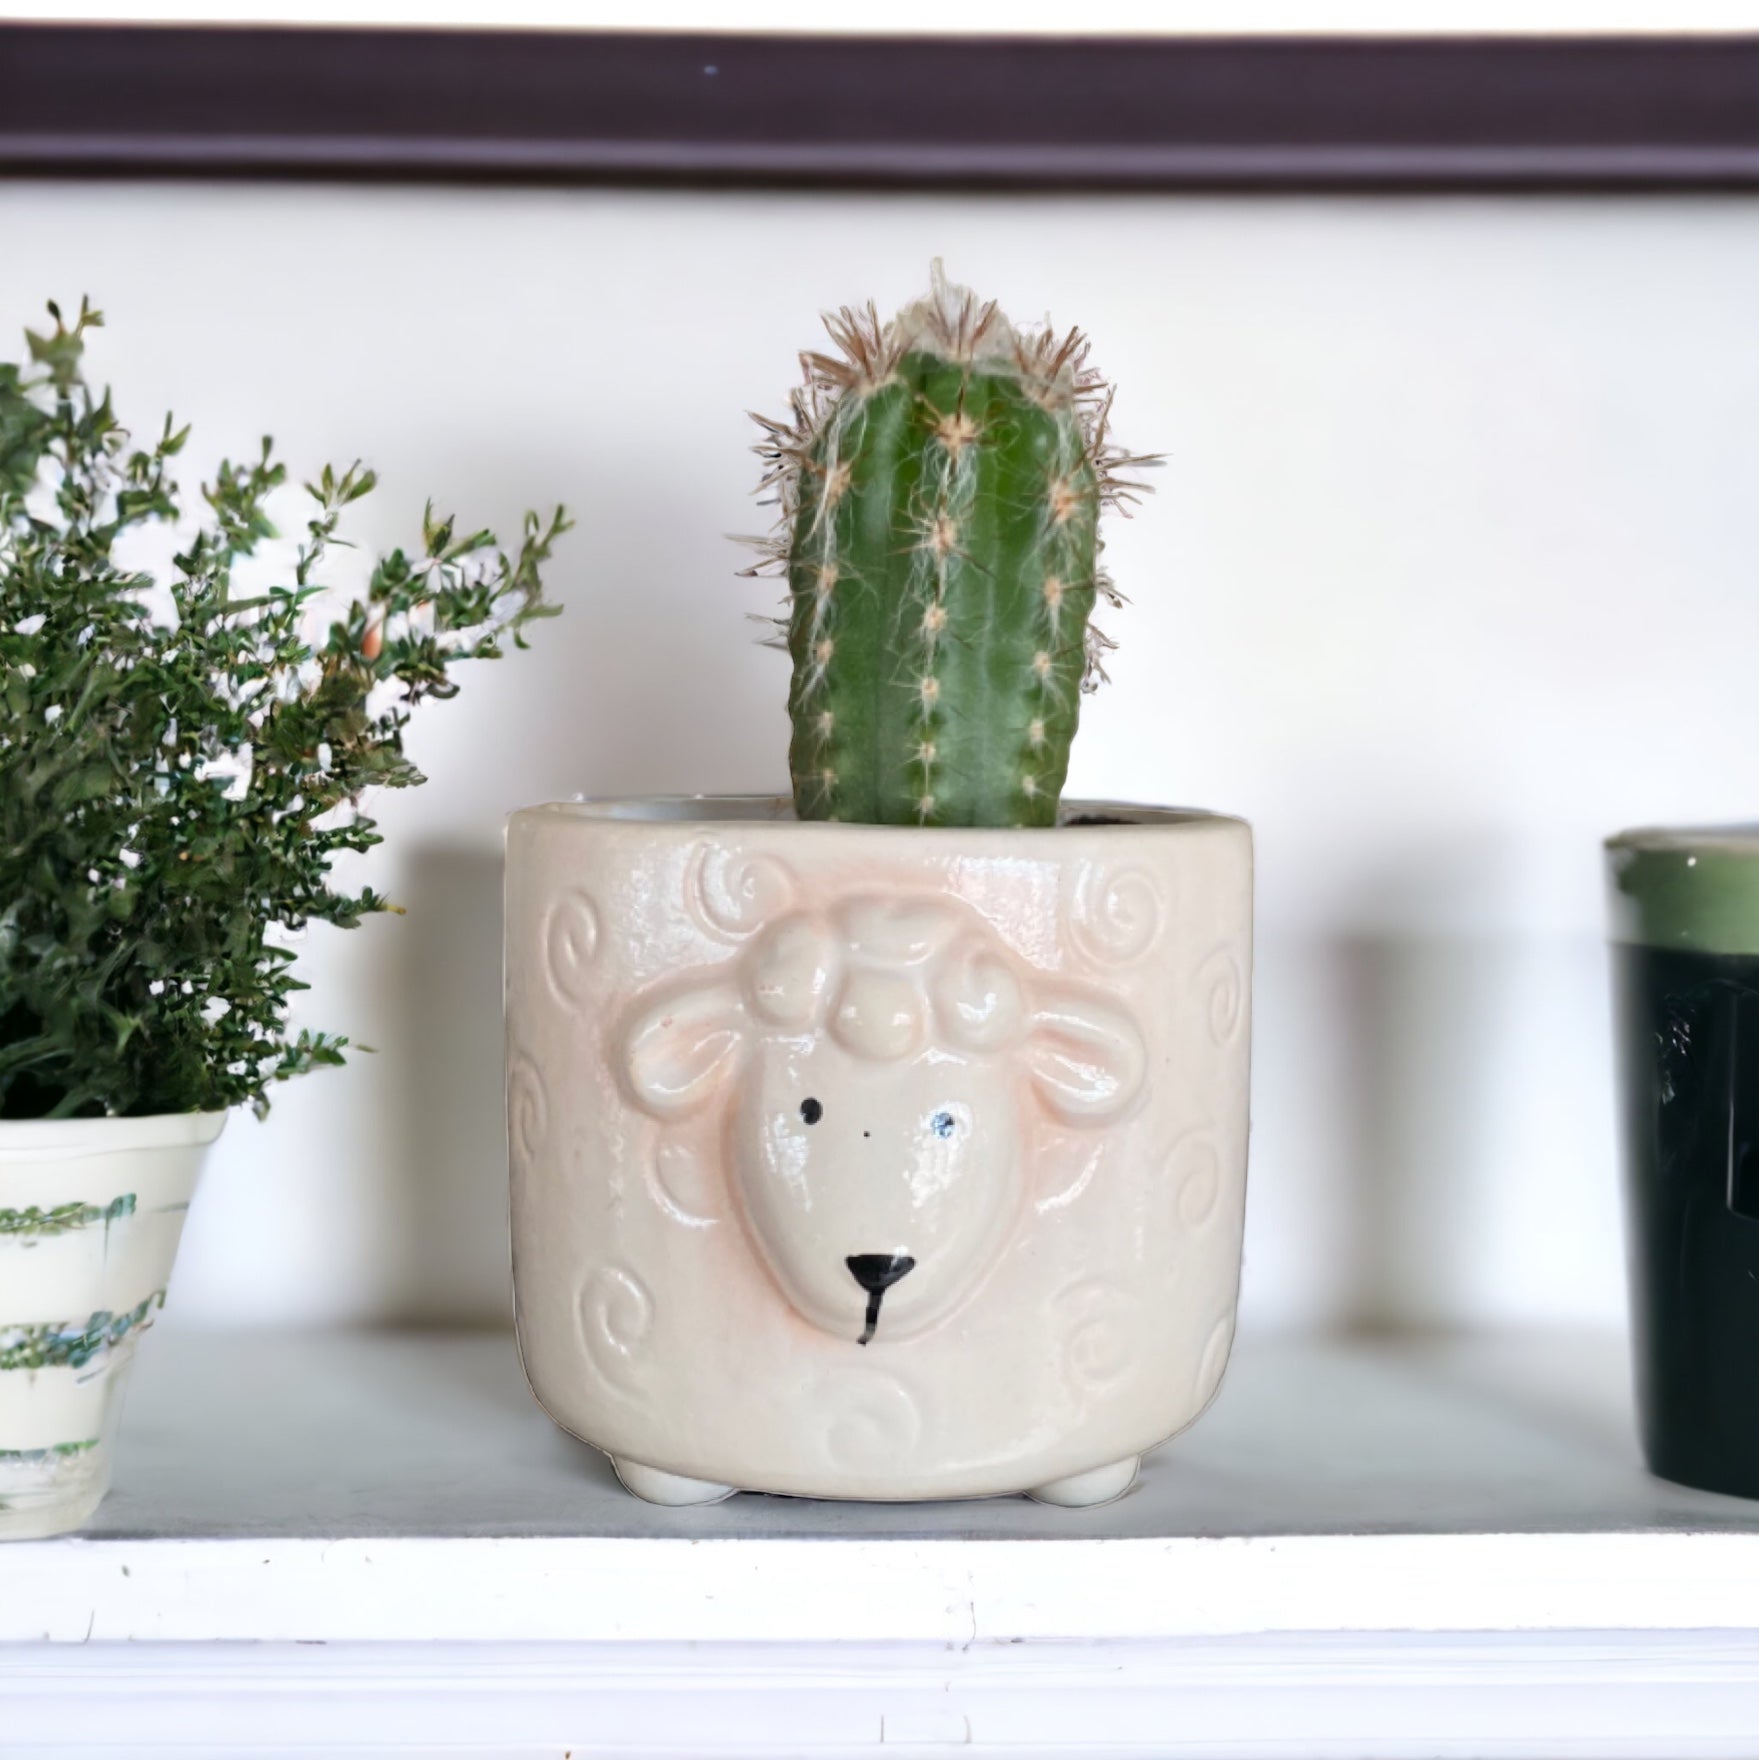 Plant Pot Planter Sheep Country - The Renmy Store Homewares & Gifts 